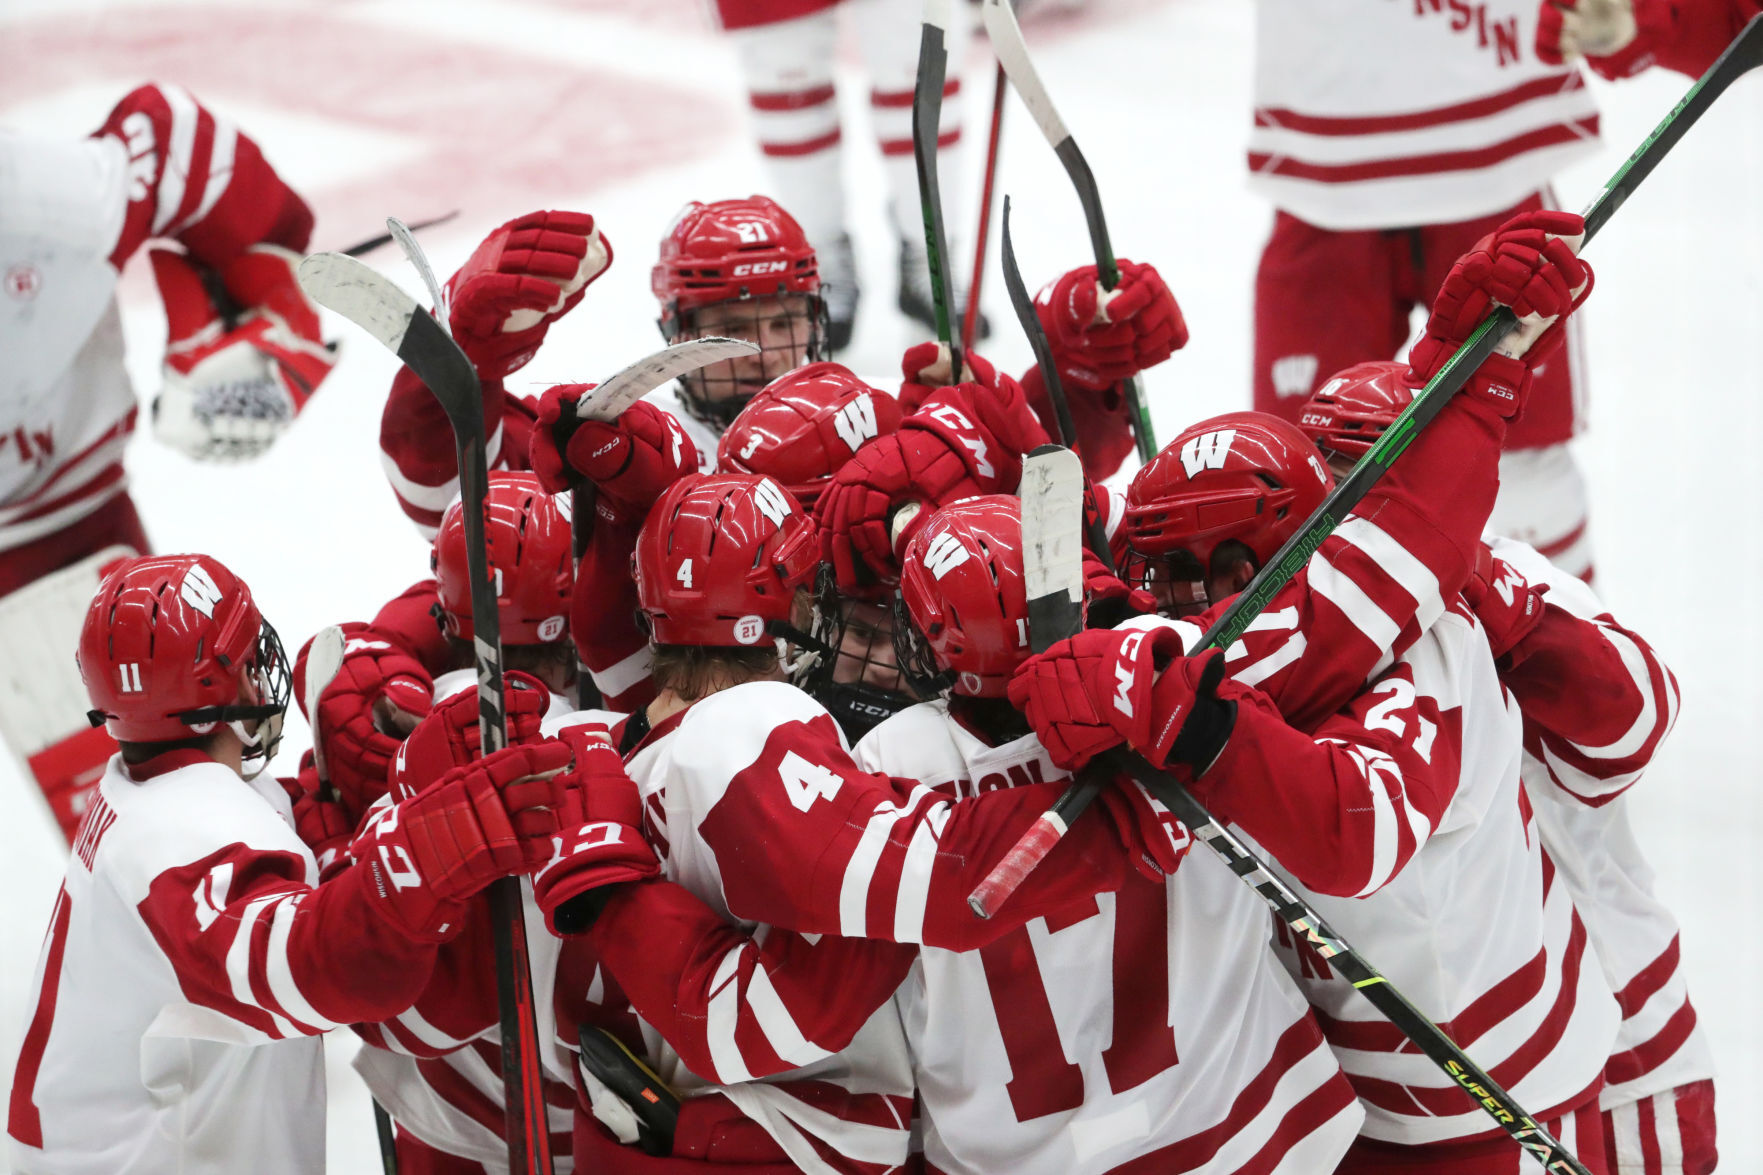 Items to know and players to watch for the Badgers mens hockey NCAA tournament game against Bemidji State